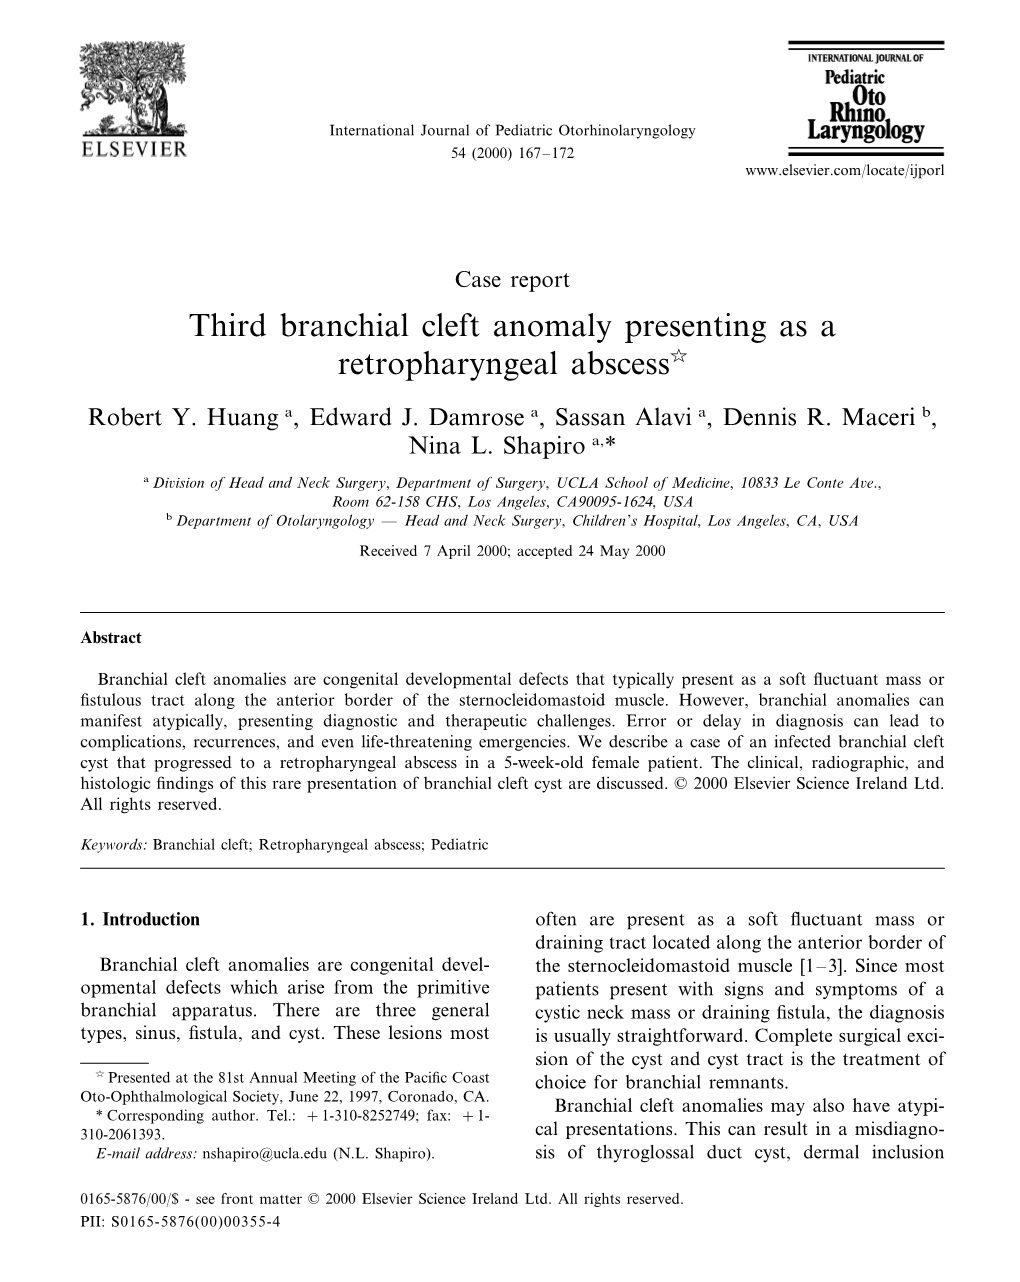 Third Branchial Cleft Anomaly Presenting As a Retropharyngeal Abscess